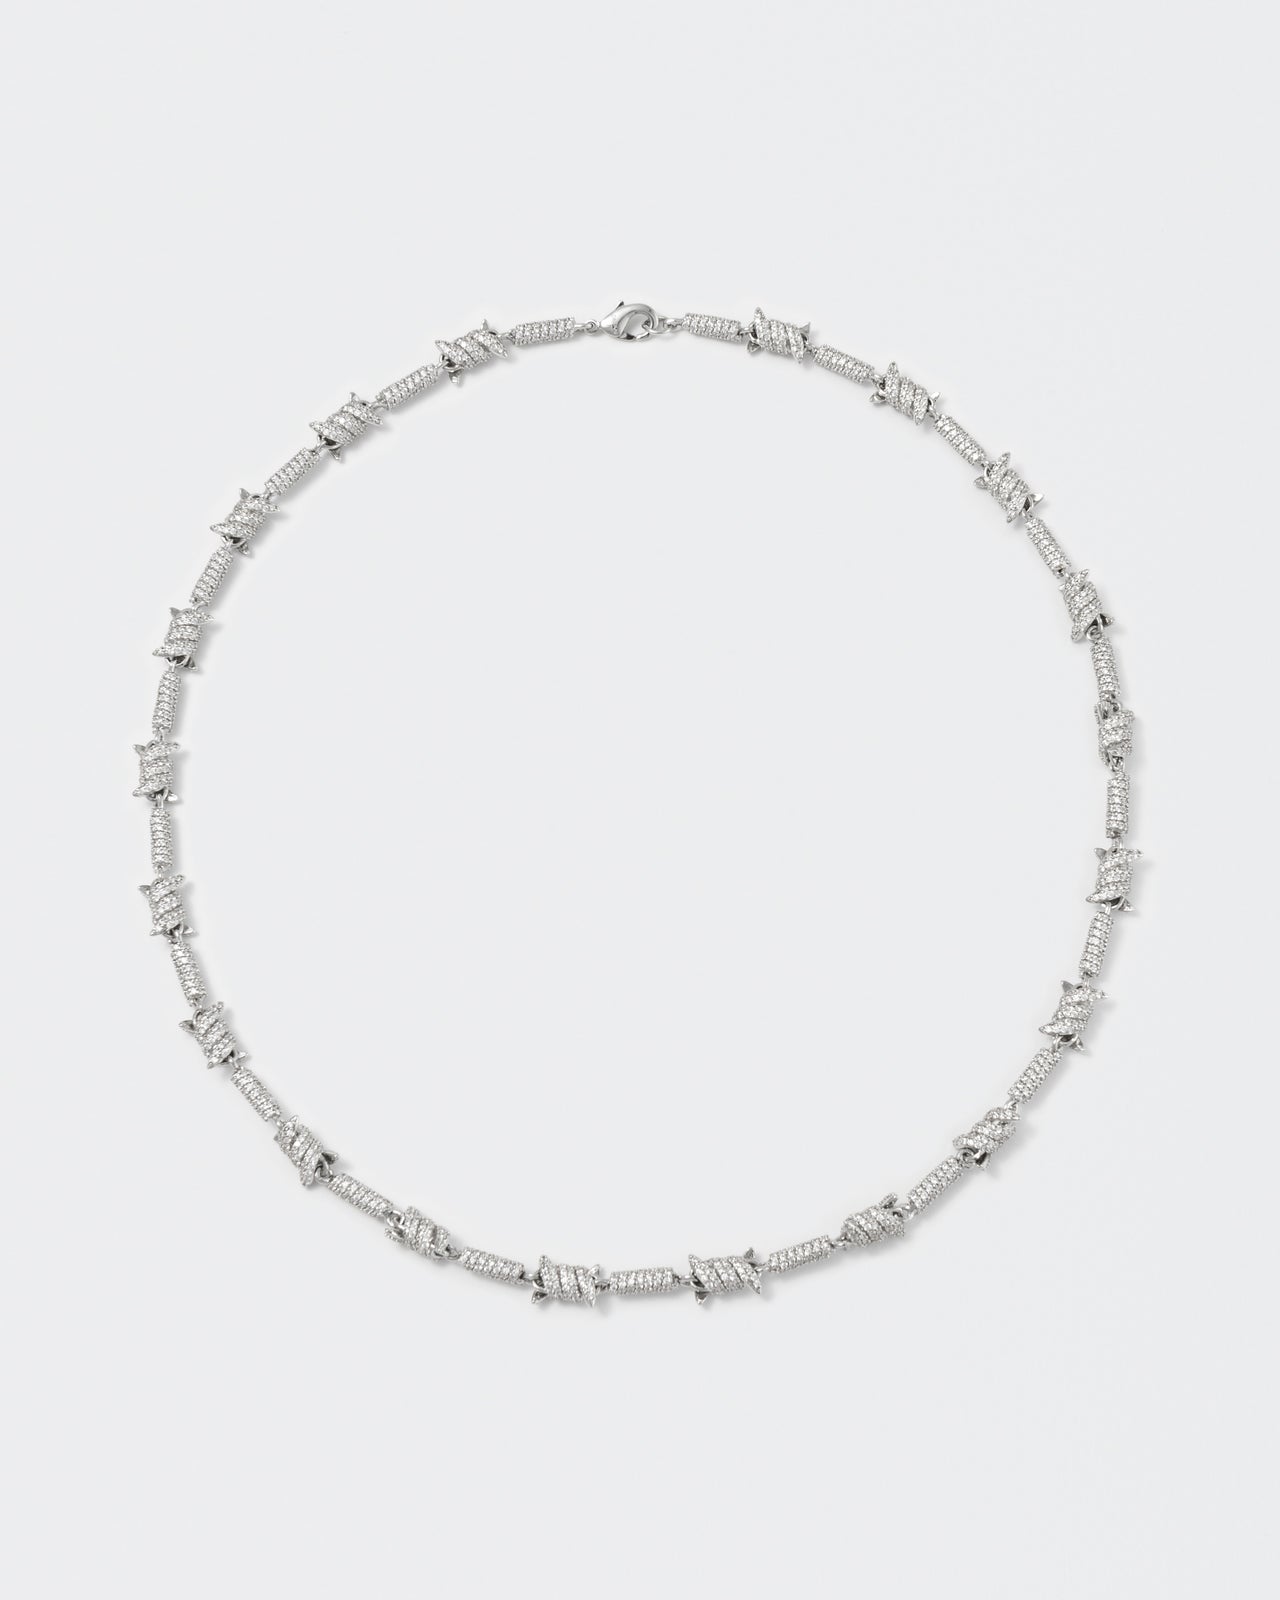 Barbed Wire necklace with 18kt white gold coating and hand-set micropavé stones in diamond white. Lobster clasp closure with logo